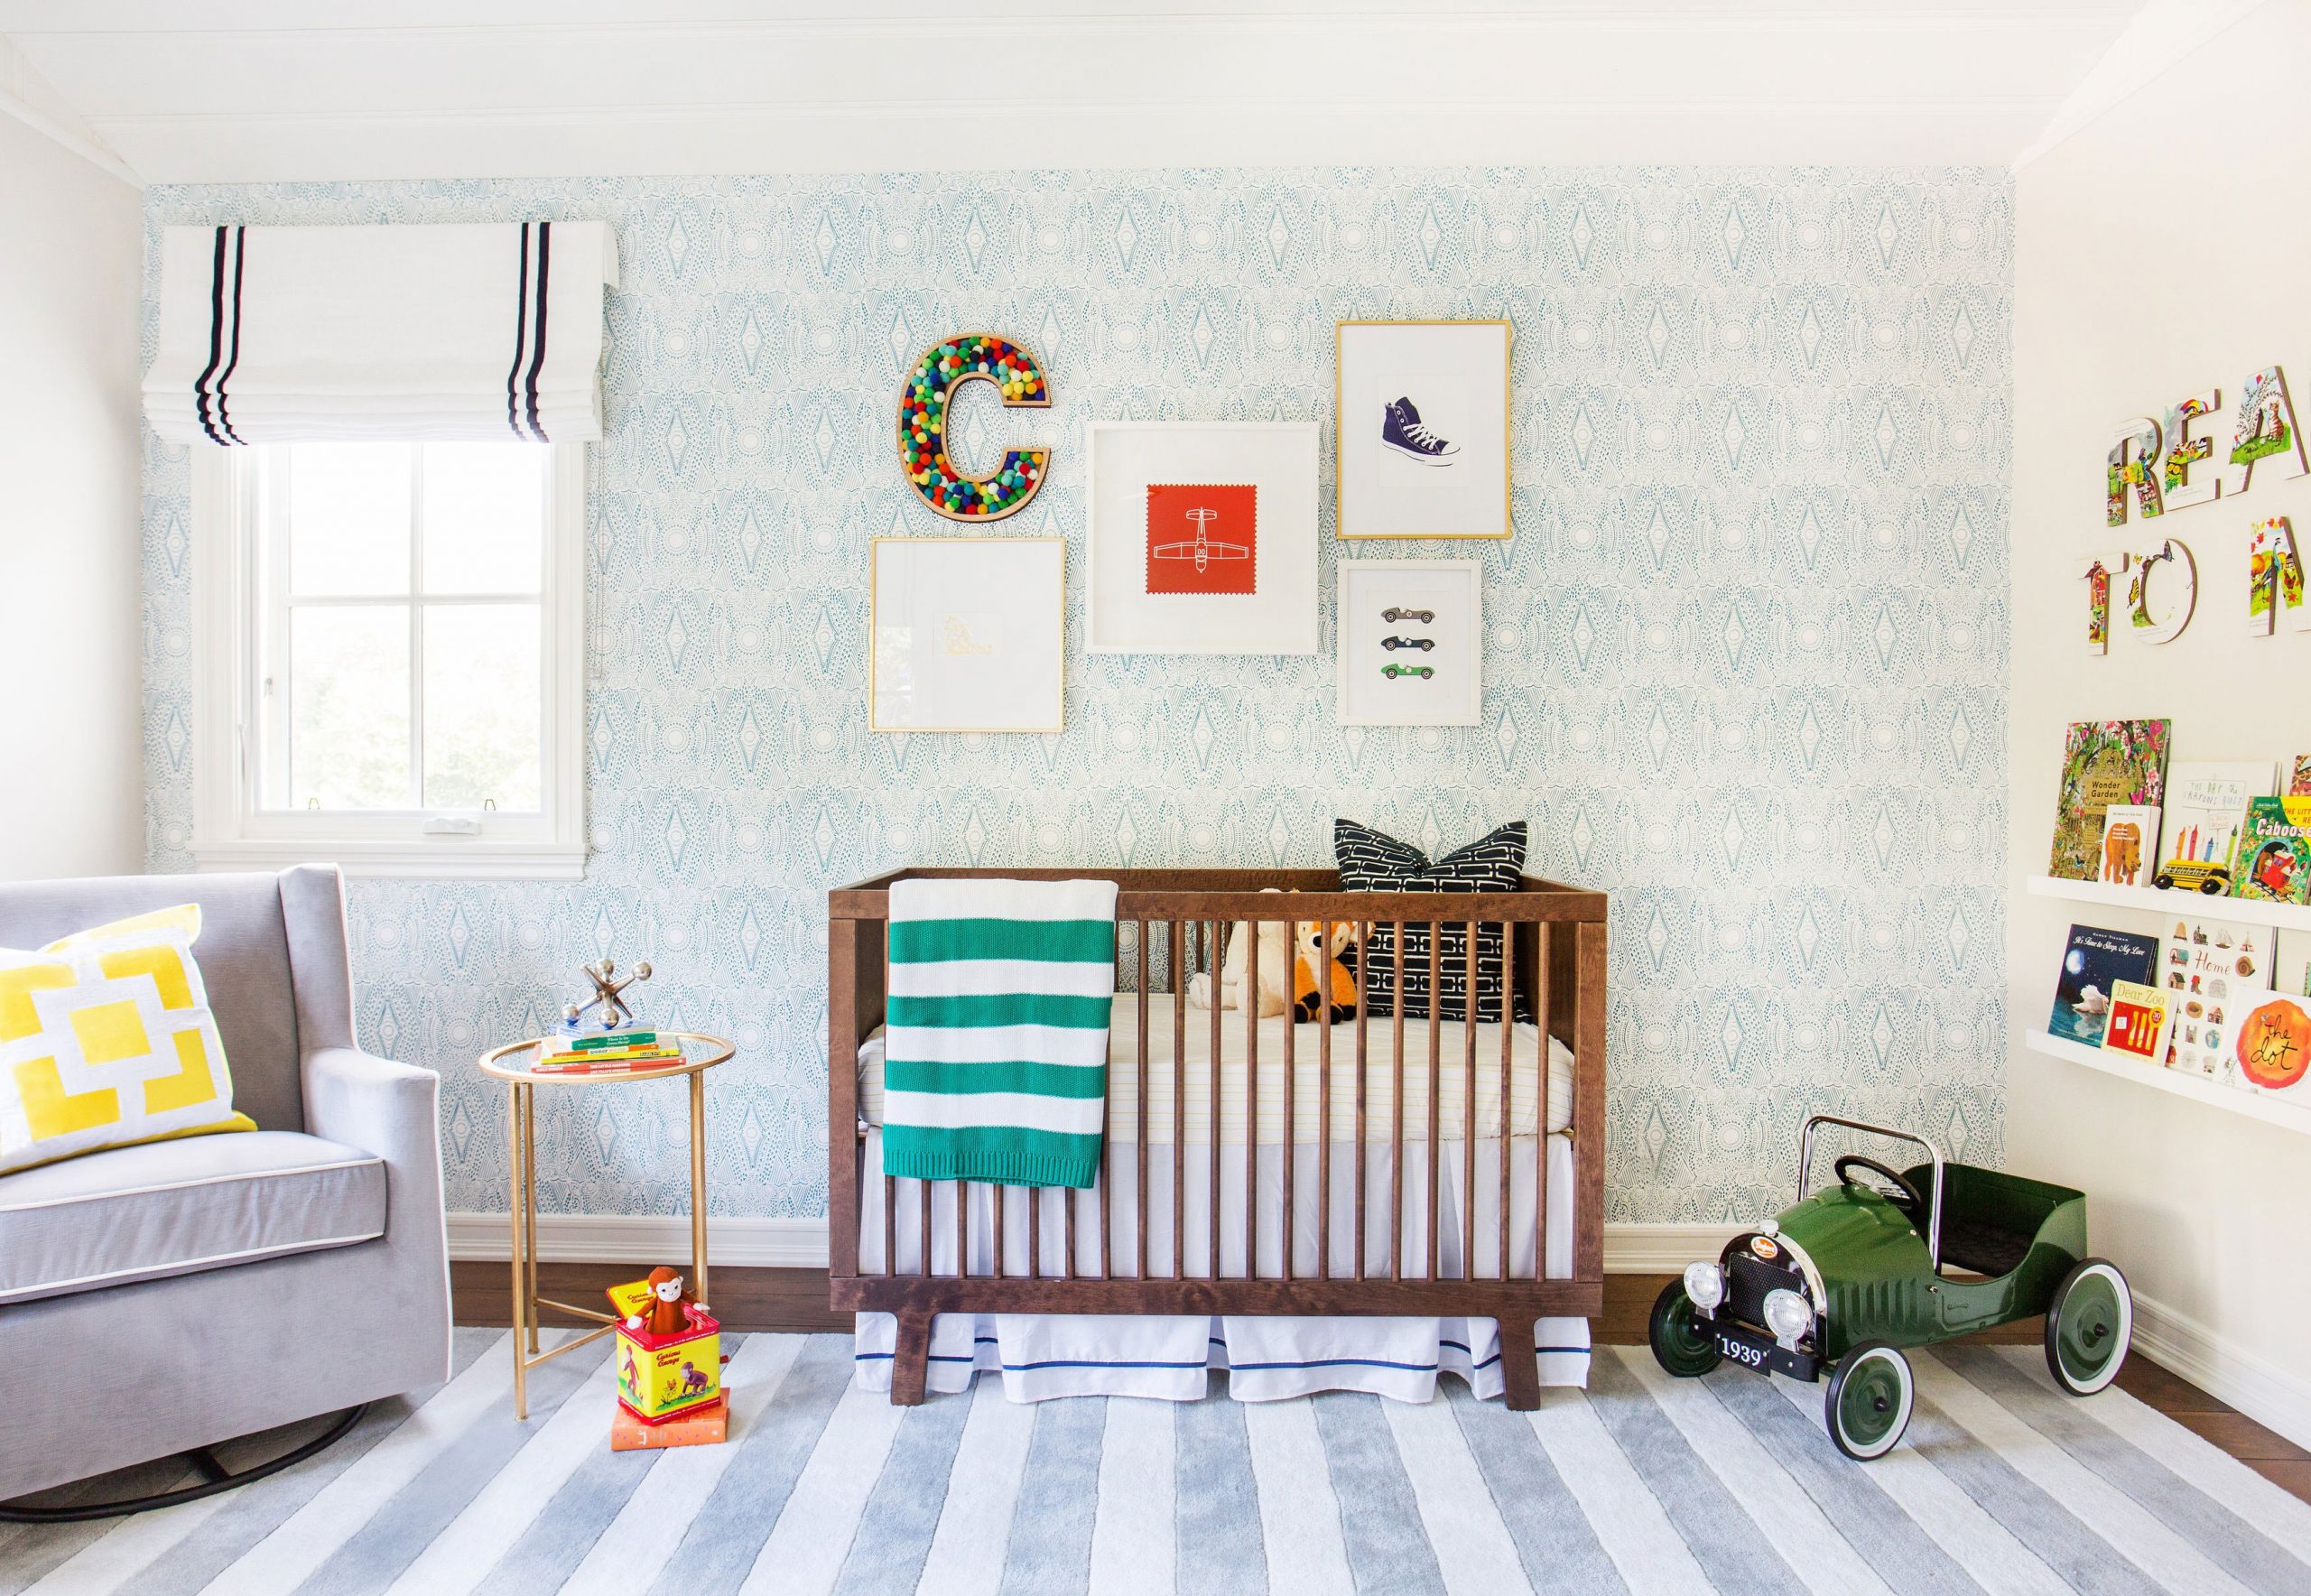 Kids Bedroom Decor
 3 Wall Decor Ideas Perfect for Kids’ Rooms s